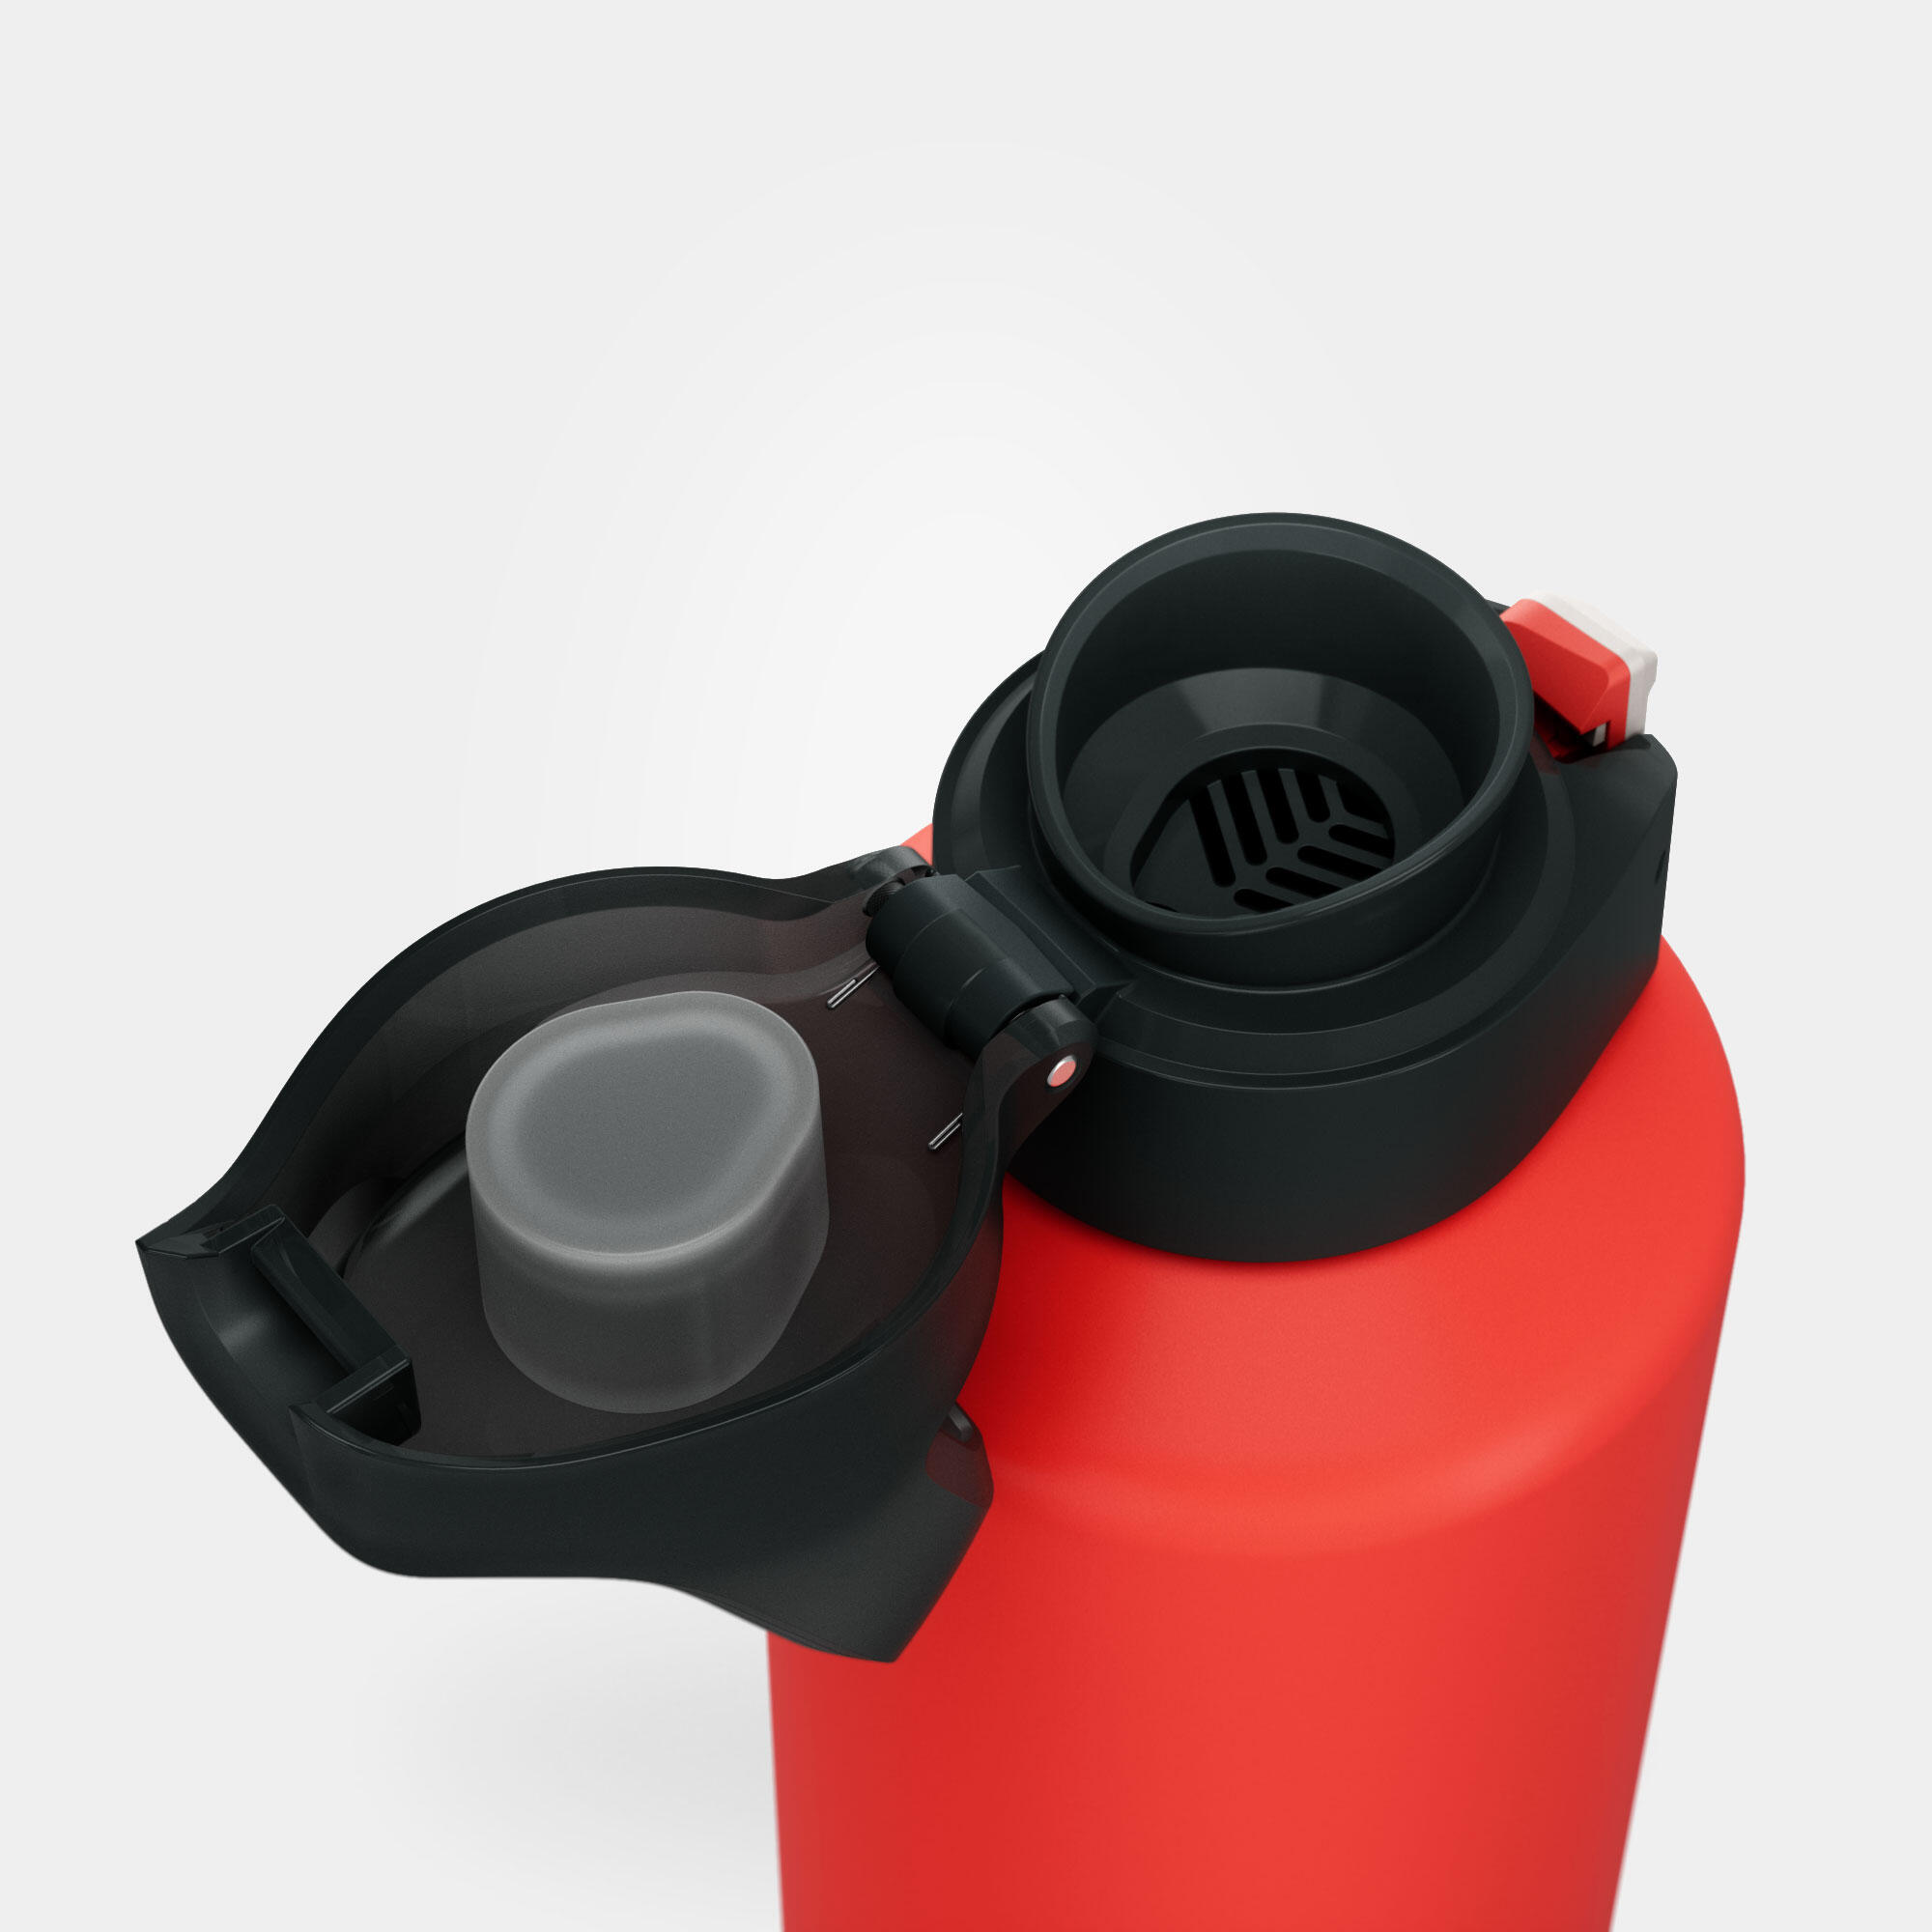 1 L aluminium water bottle with quick opening cap for hiking - Red 8/11